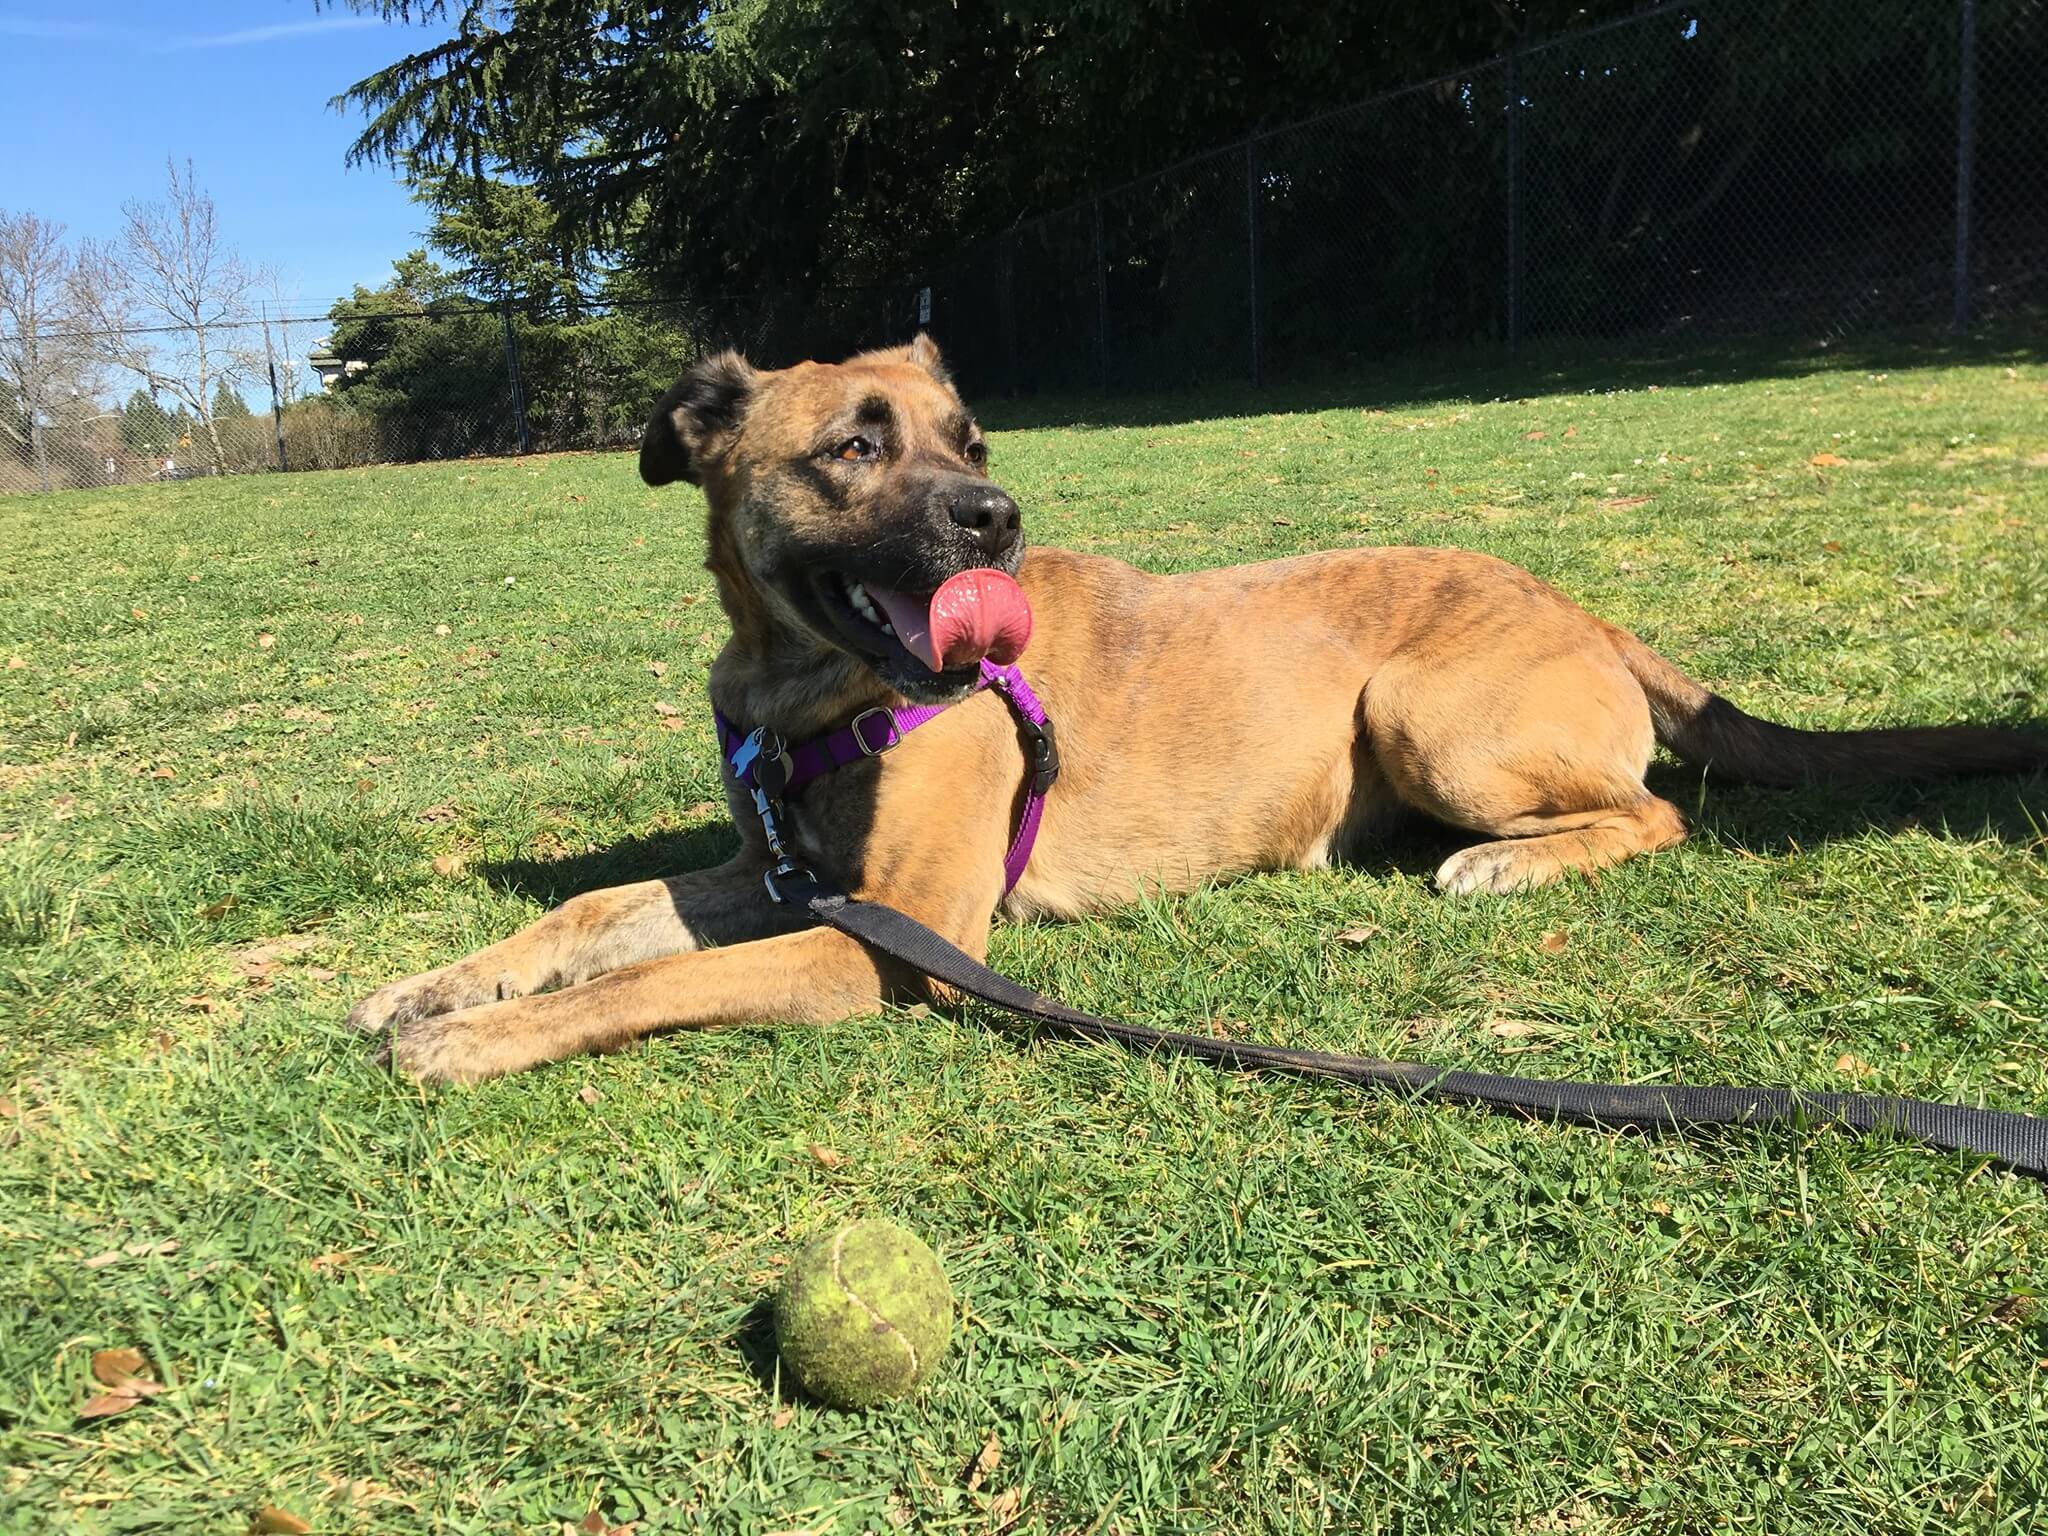 At the dog park with a ball